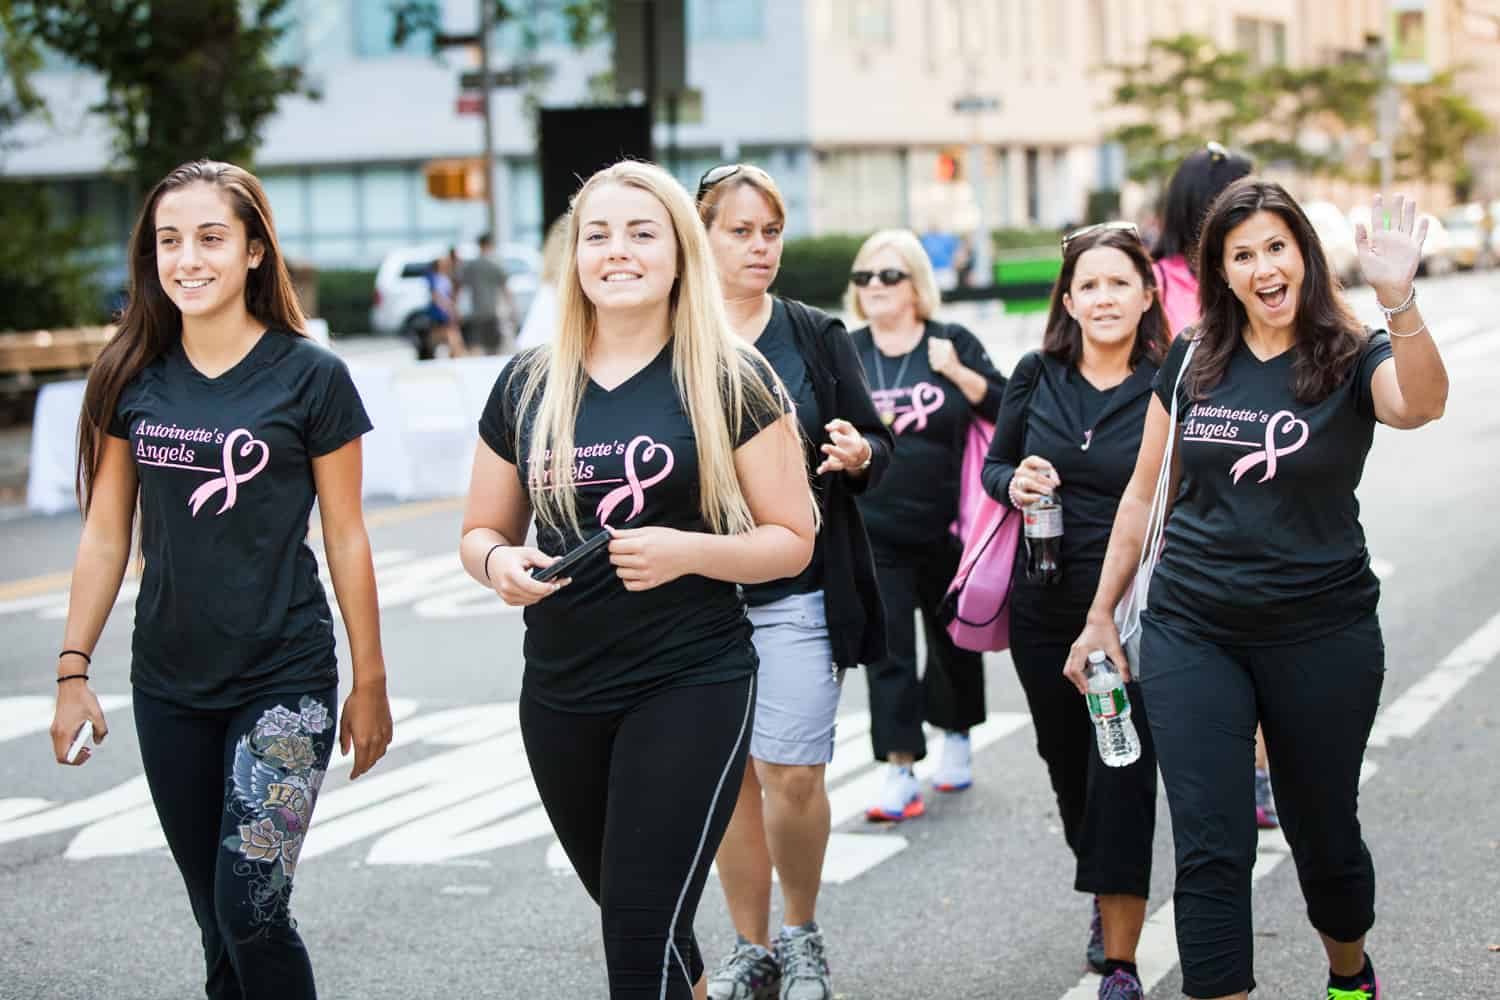 NYC Race for the Cure photos of group of supporters wearing black outfits